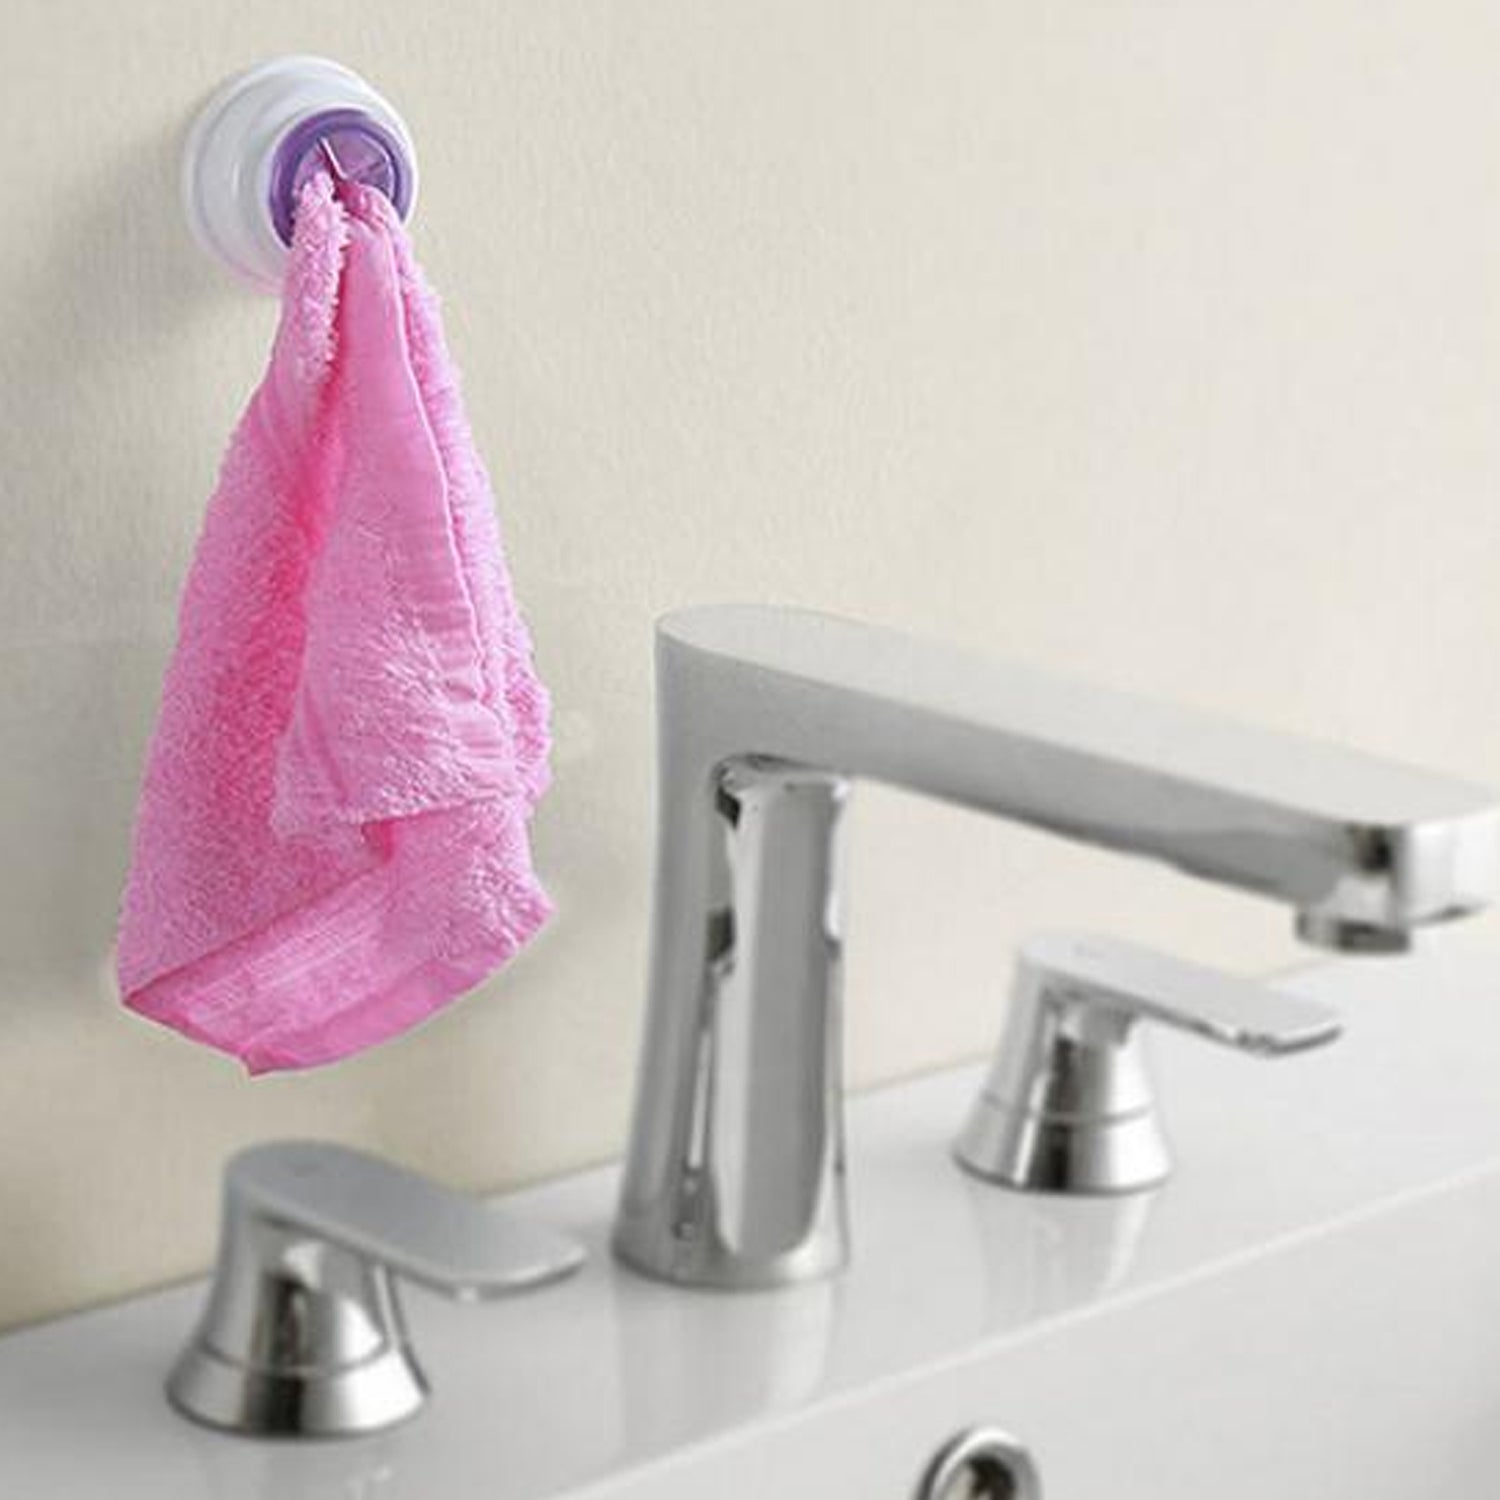 6146A 1PC TOWEL HOLDER MOSTLY USED IN ALL KINDS OF BATHROOM PURPOSES FOR HANGING AND PLACING TOWELS FOR EASY TAKE-IN AND TAKE-OUT PURPOSES (MOQ :-12 Pc)